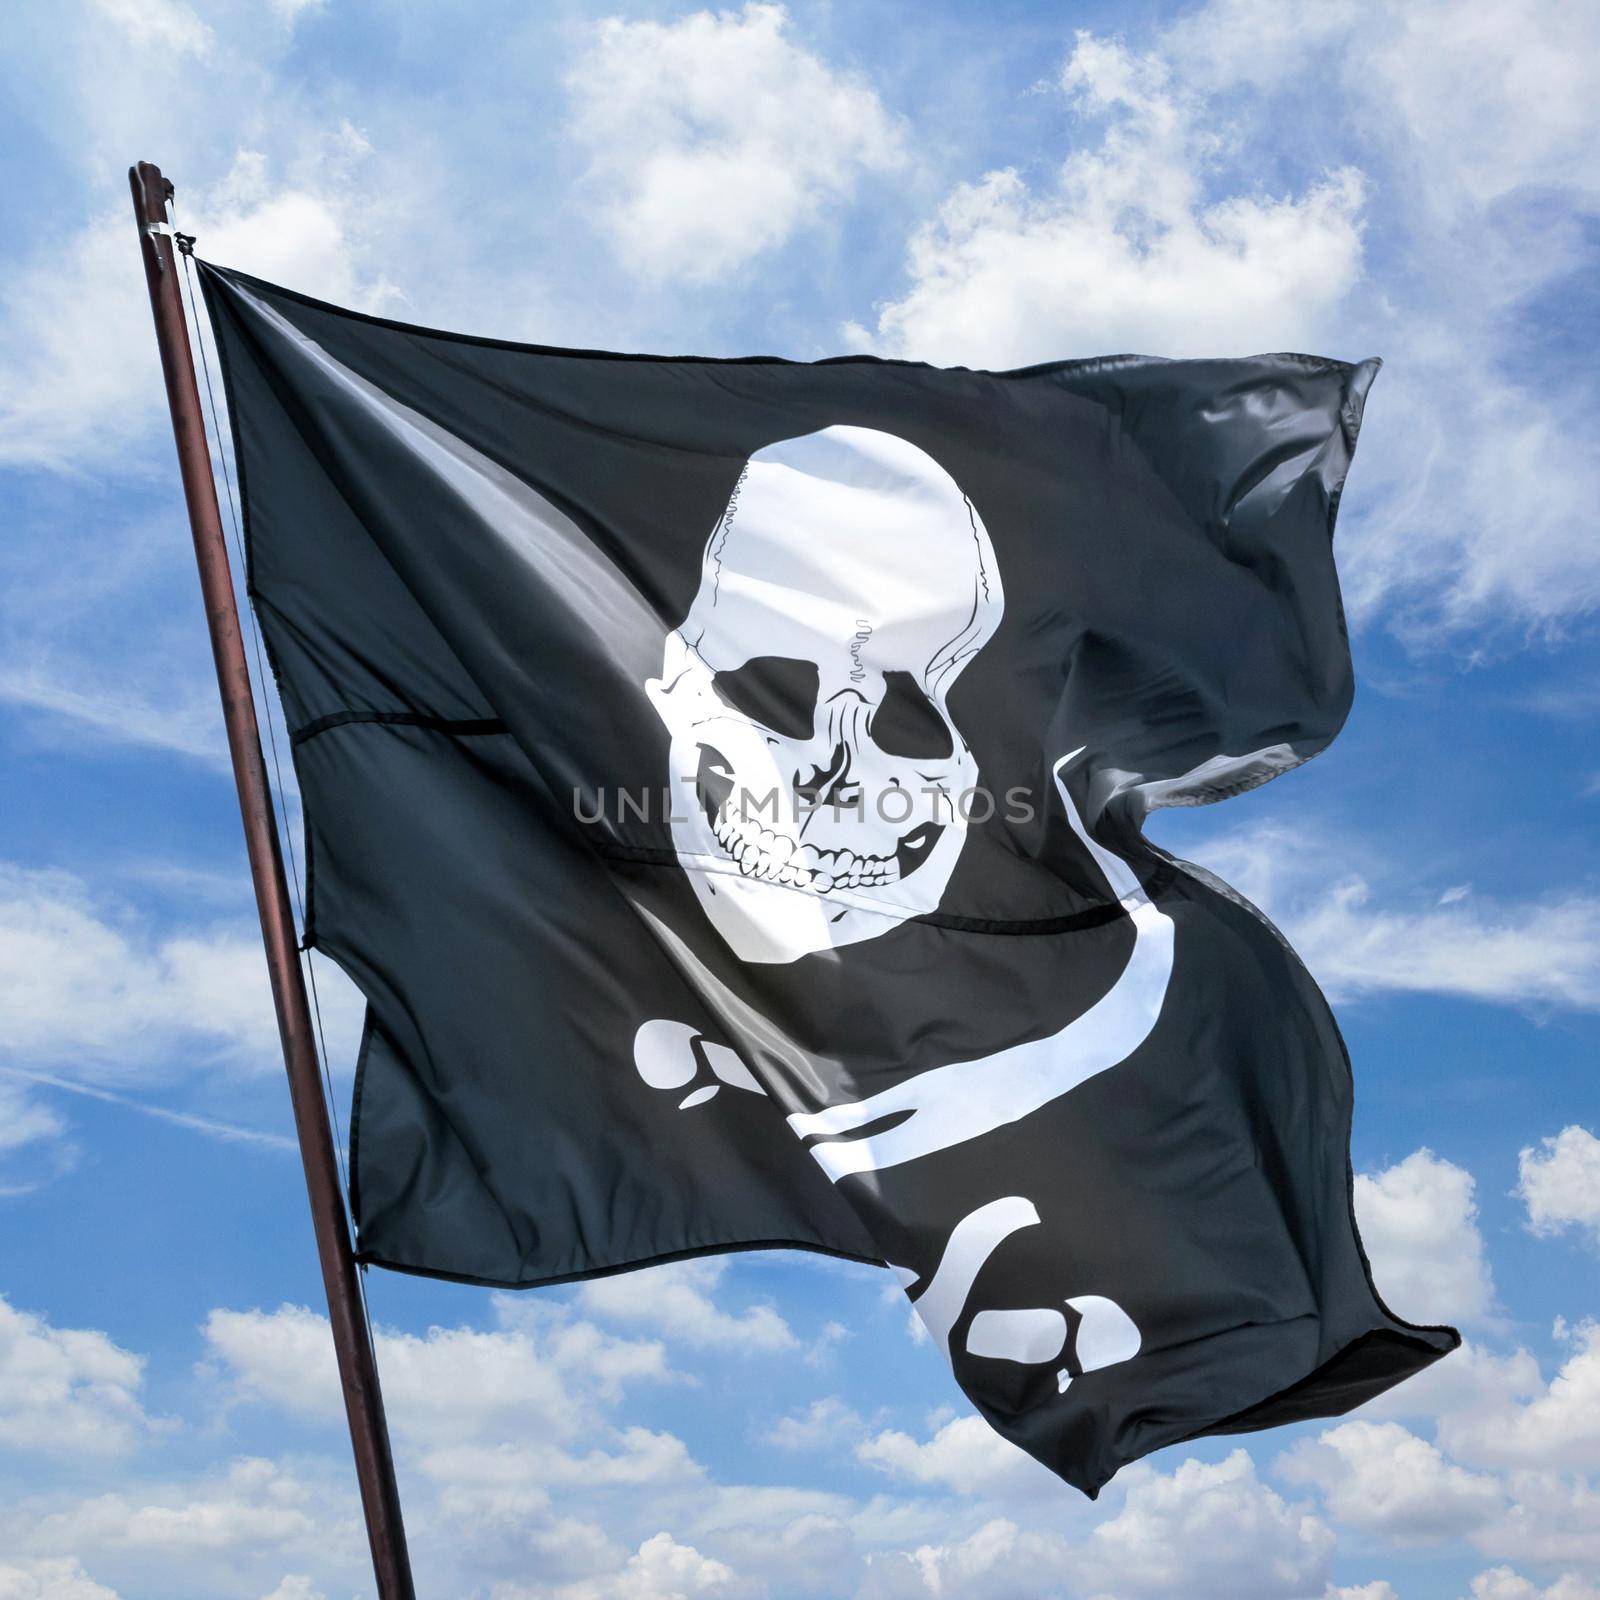 Pirates flag in the wind by germanopoli